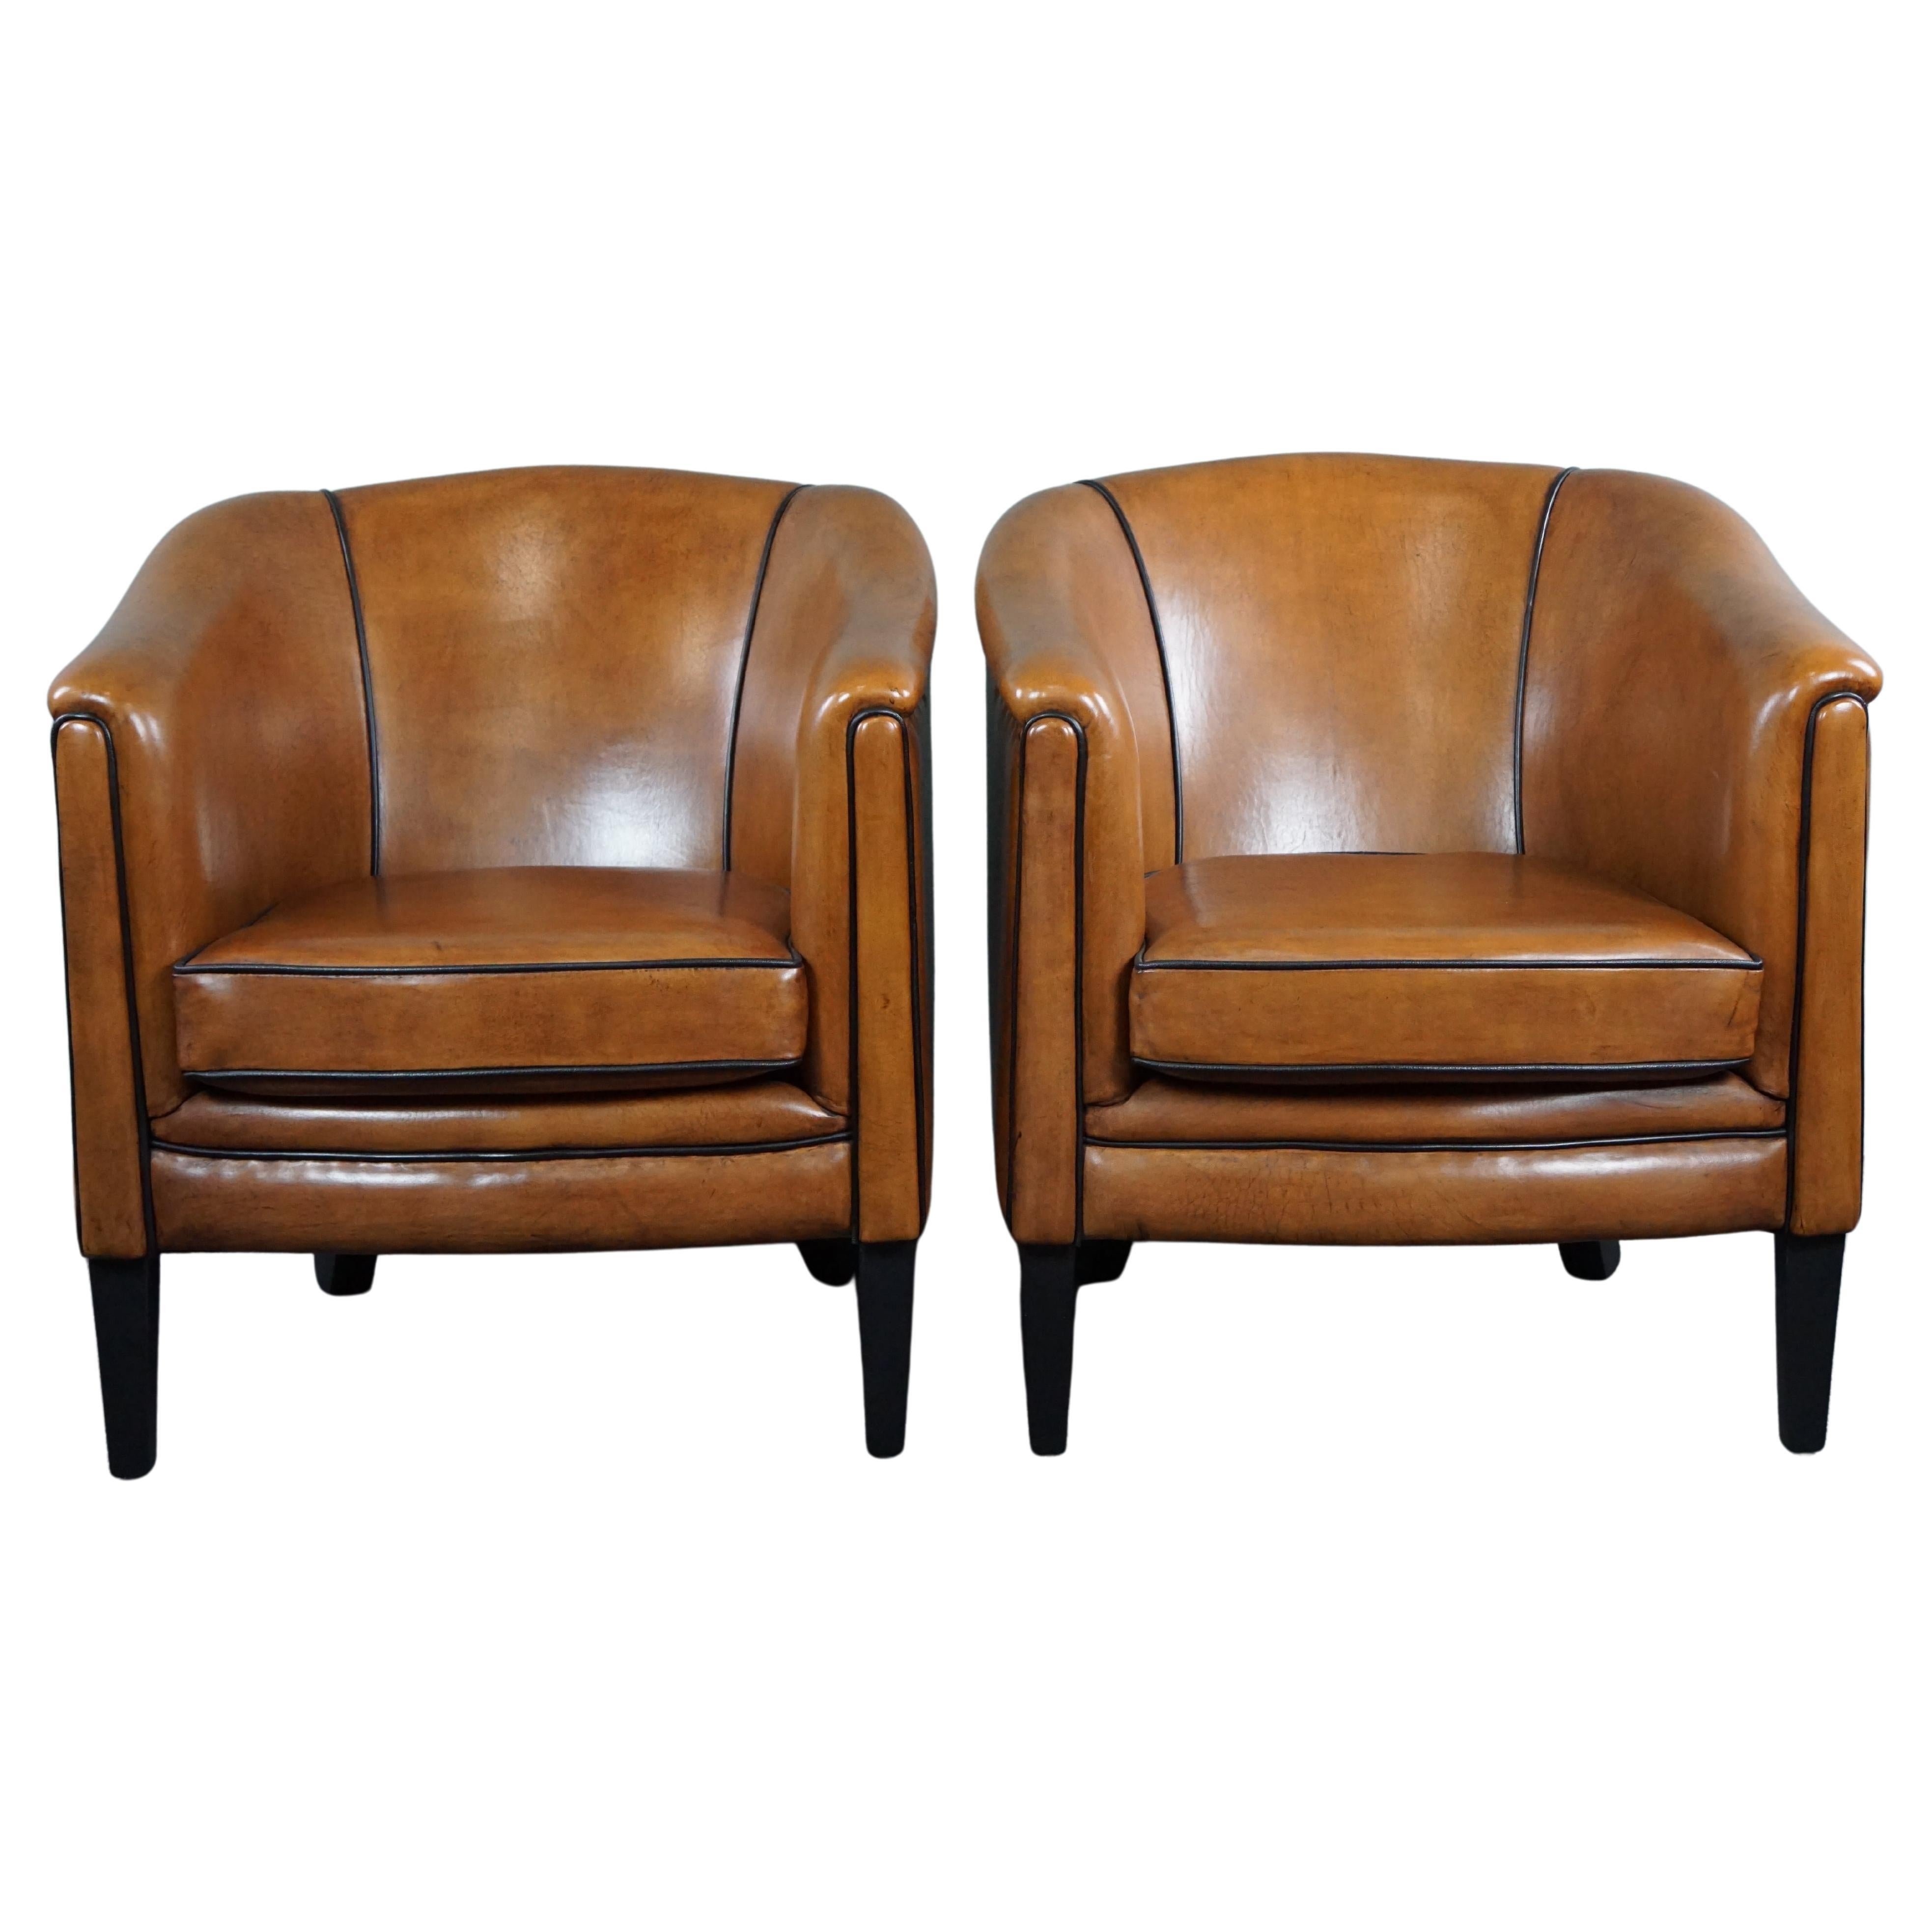 New set of two sheep leather armchairs with black piping For Sale